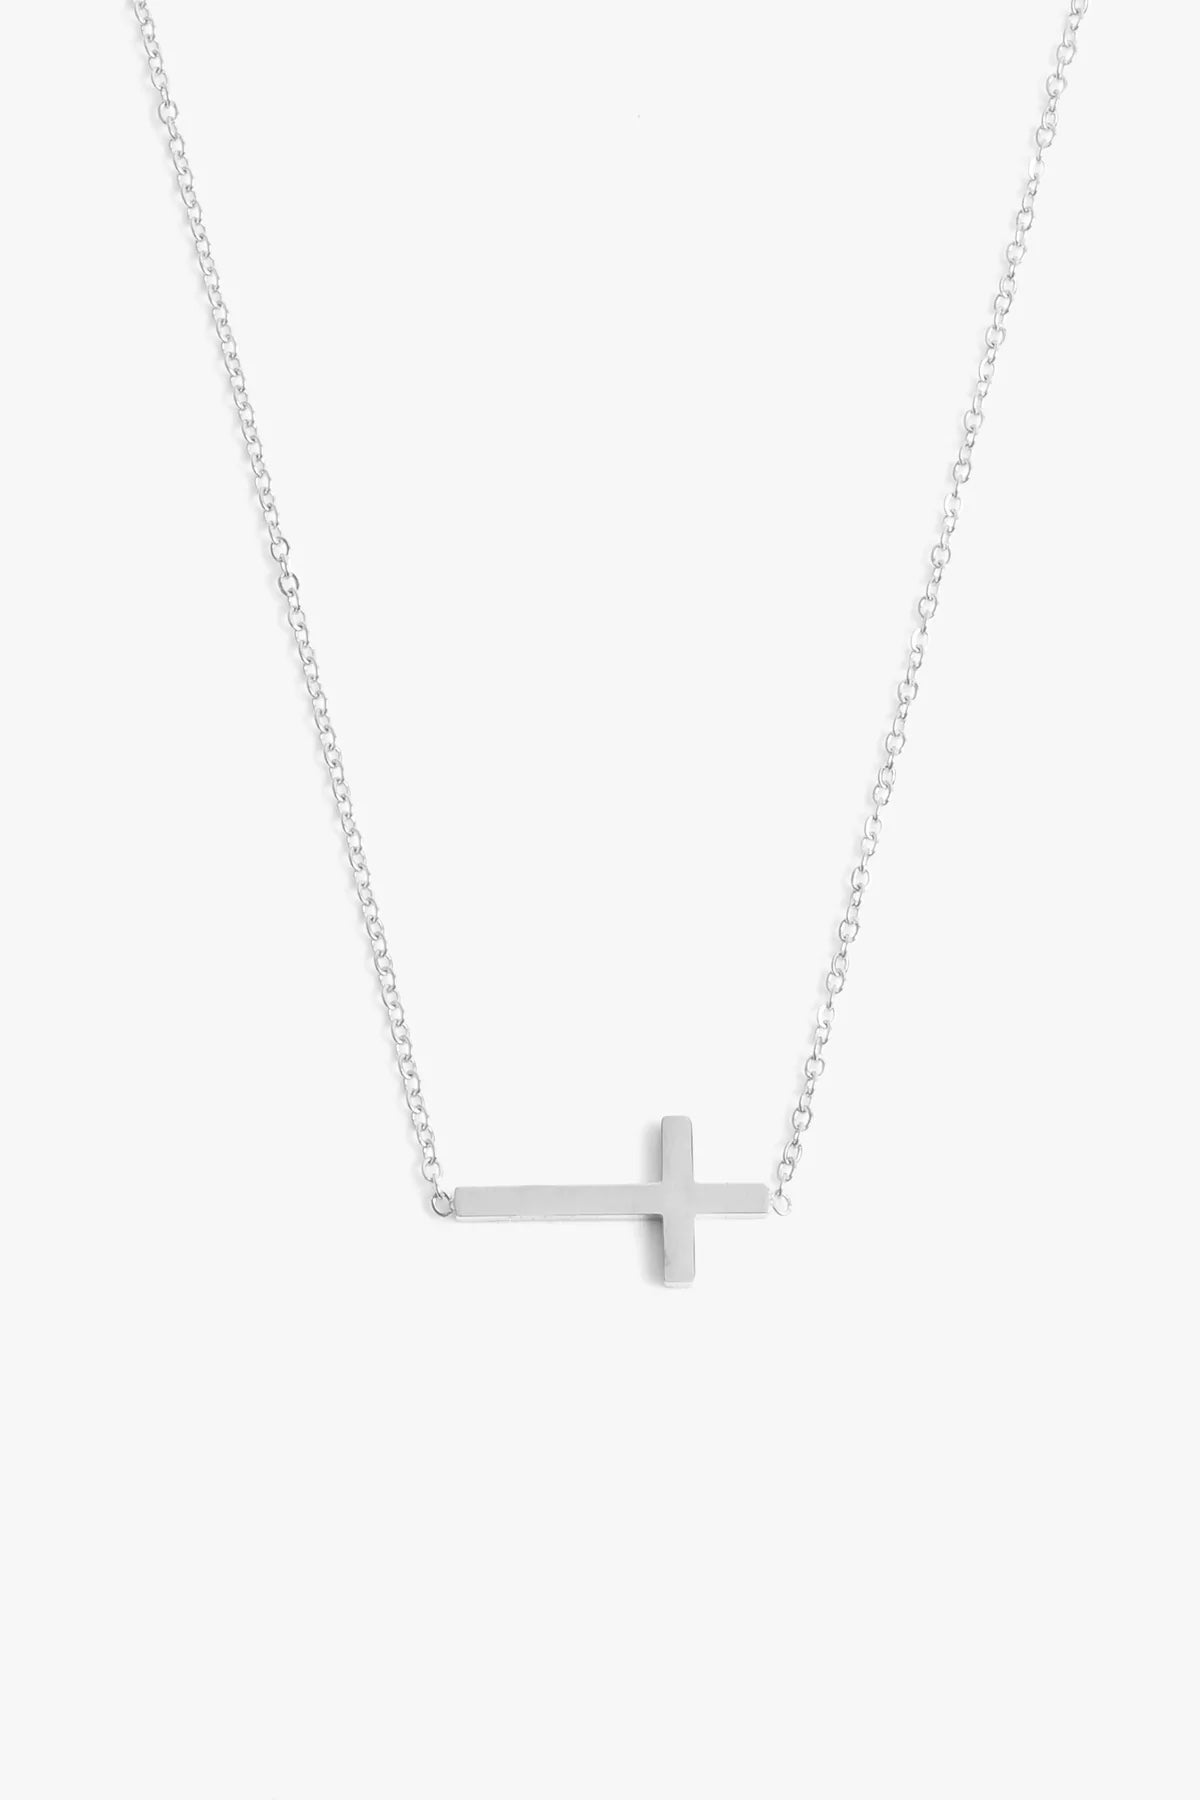 Marrin Costello - Barry Necklace - Silver